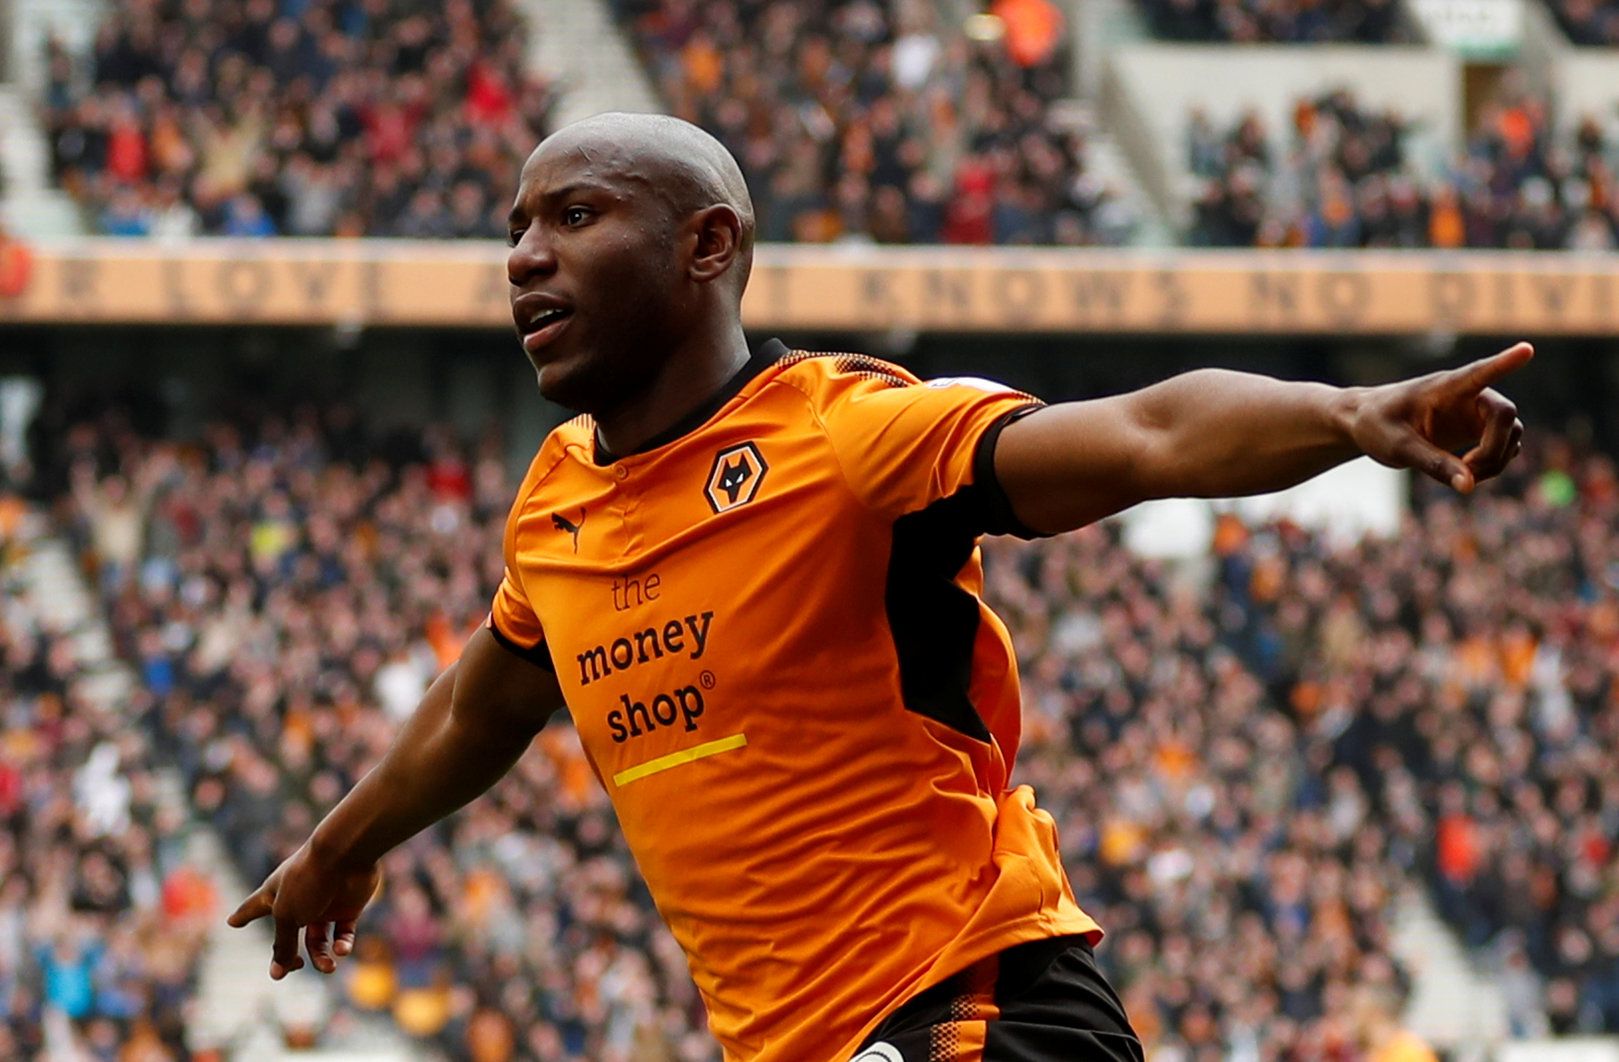 Soccer Football - Championship - Wolverhampton Wanderers vs Birmingham City - Molineux Stadium, Wolverhampton, Britain - April 15, 2018   Wolverhampton Wanderers' Benik Afobe celebrates scoring their second goal        Action Images via Reuters/Andrew Boyers    EDITORIAL USE ONLY. No use with unauthorized audio, video, data, fixture lists, club/league logos or 